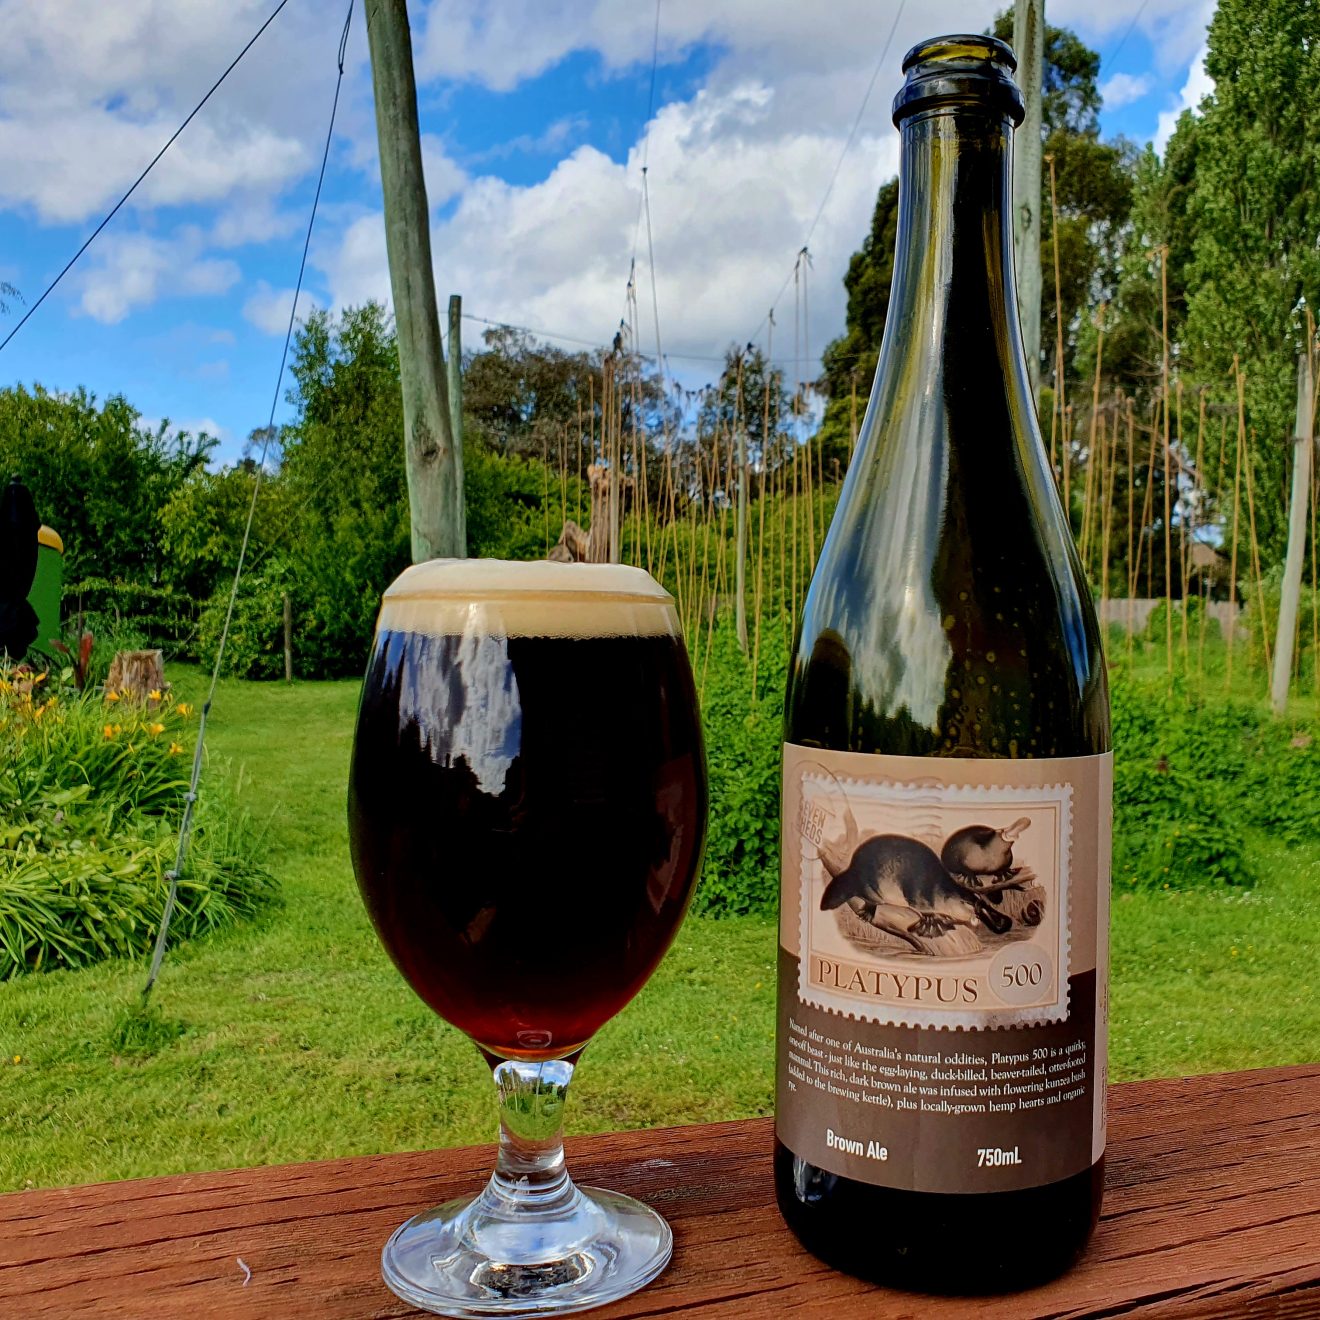 Sitting on stained timber, a glass of dark brown beer with a pale brown foam sits next to an antique green bottle labelled Platypus 500. The background is grass, flowers to the left and hop bines to the right with trees further back, white fluffy clouds dominate the blue sky.